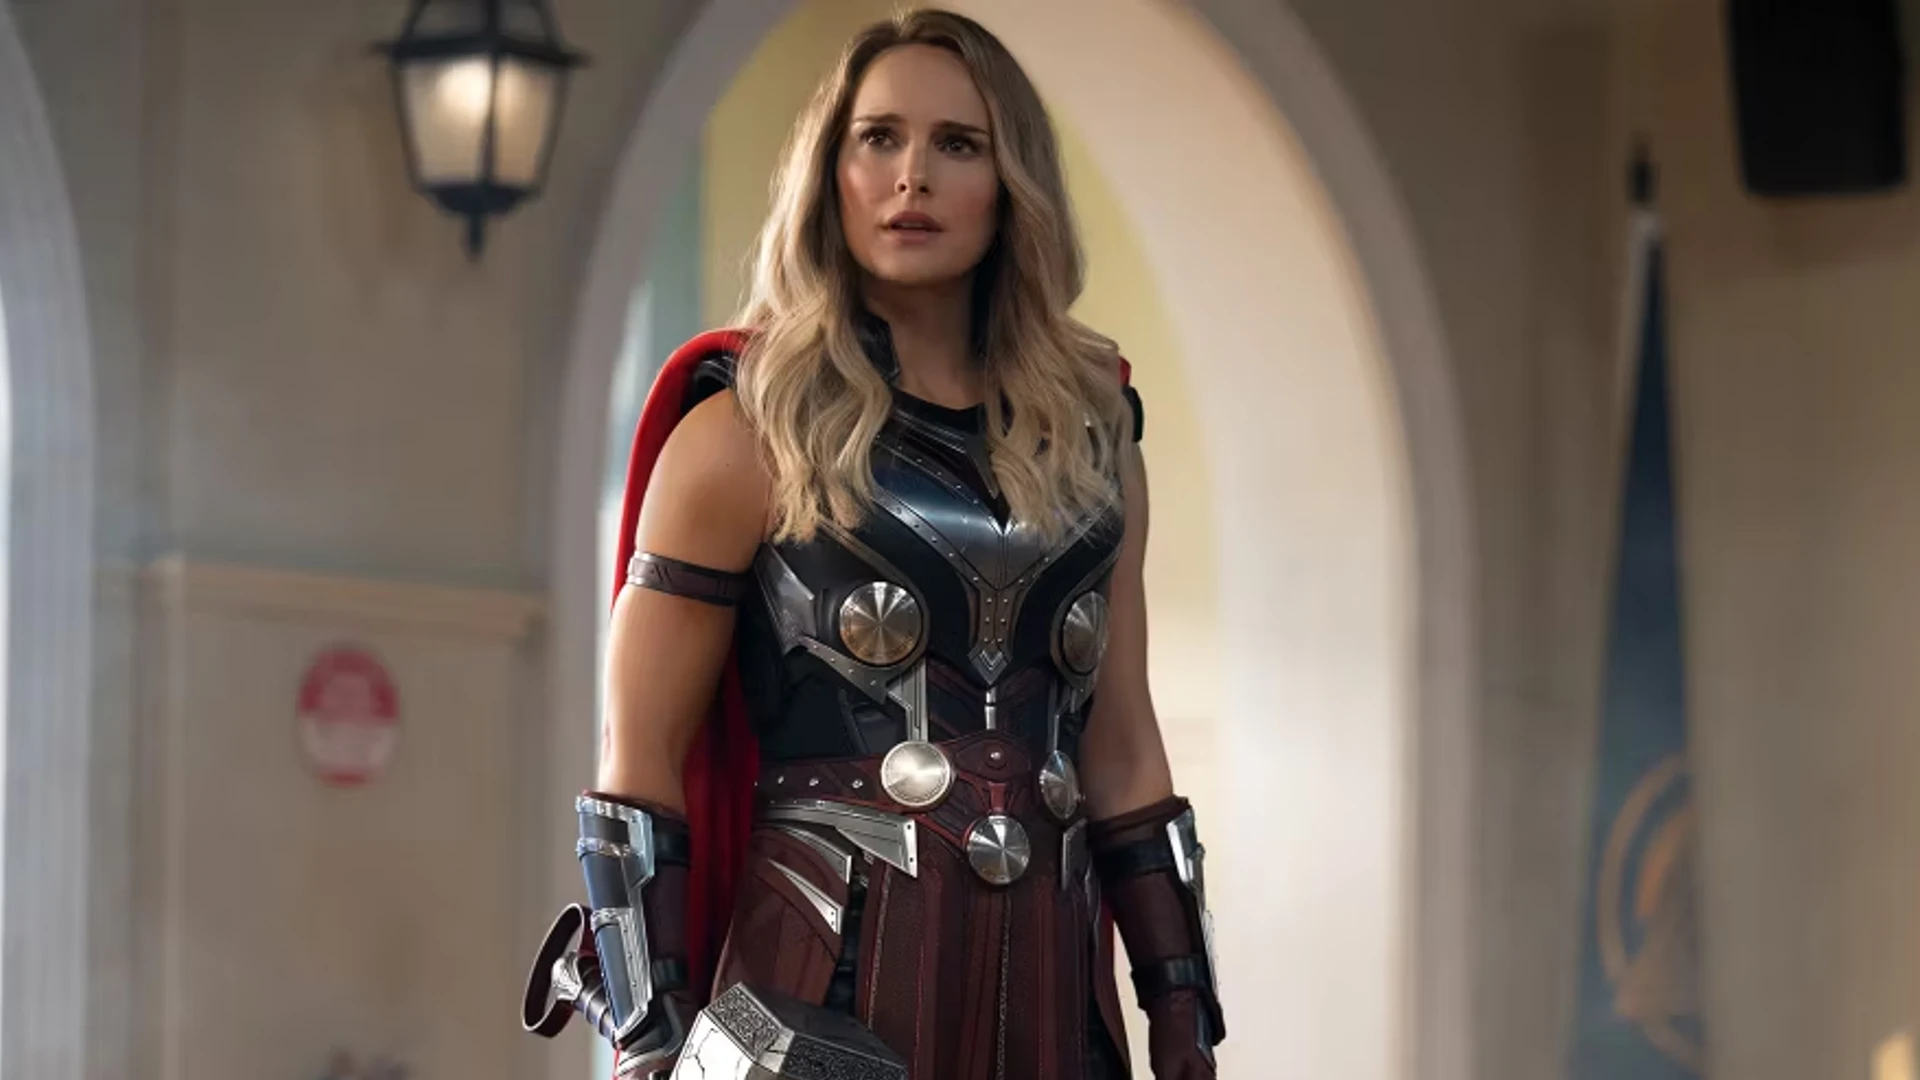 Portman & Waititi Reveal Mighty Thor Cancer Story In Love & Thunder